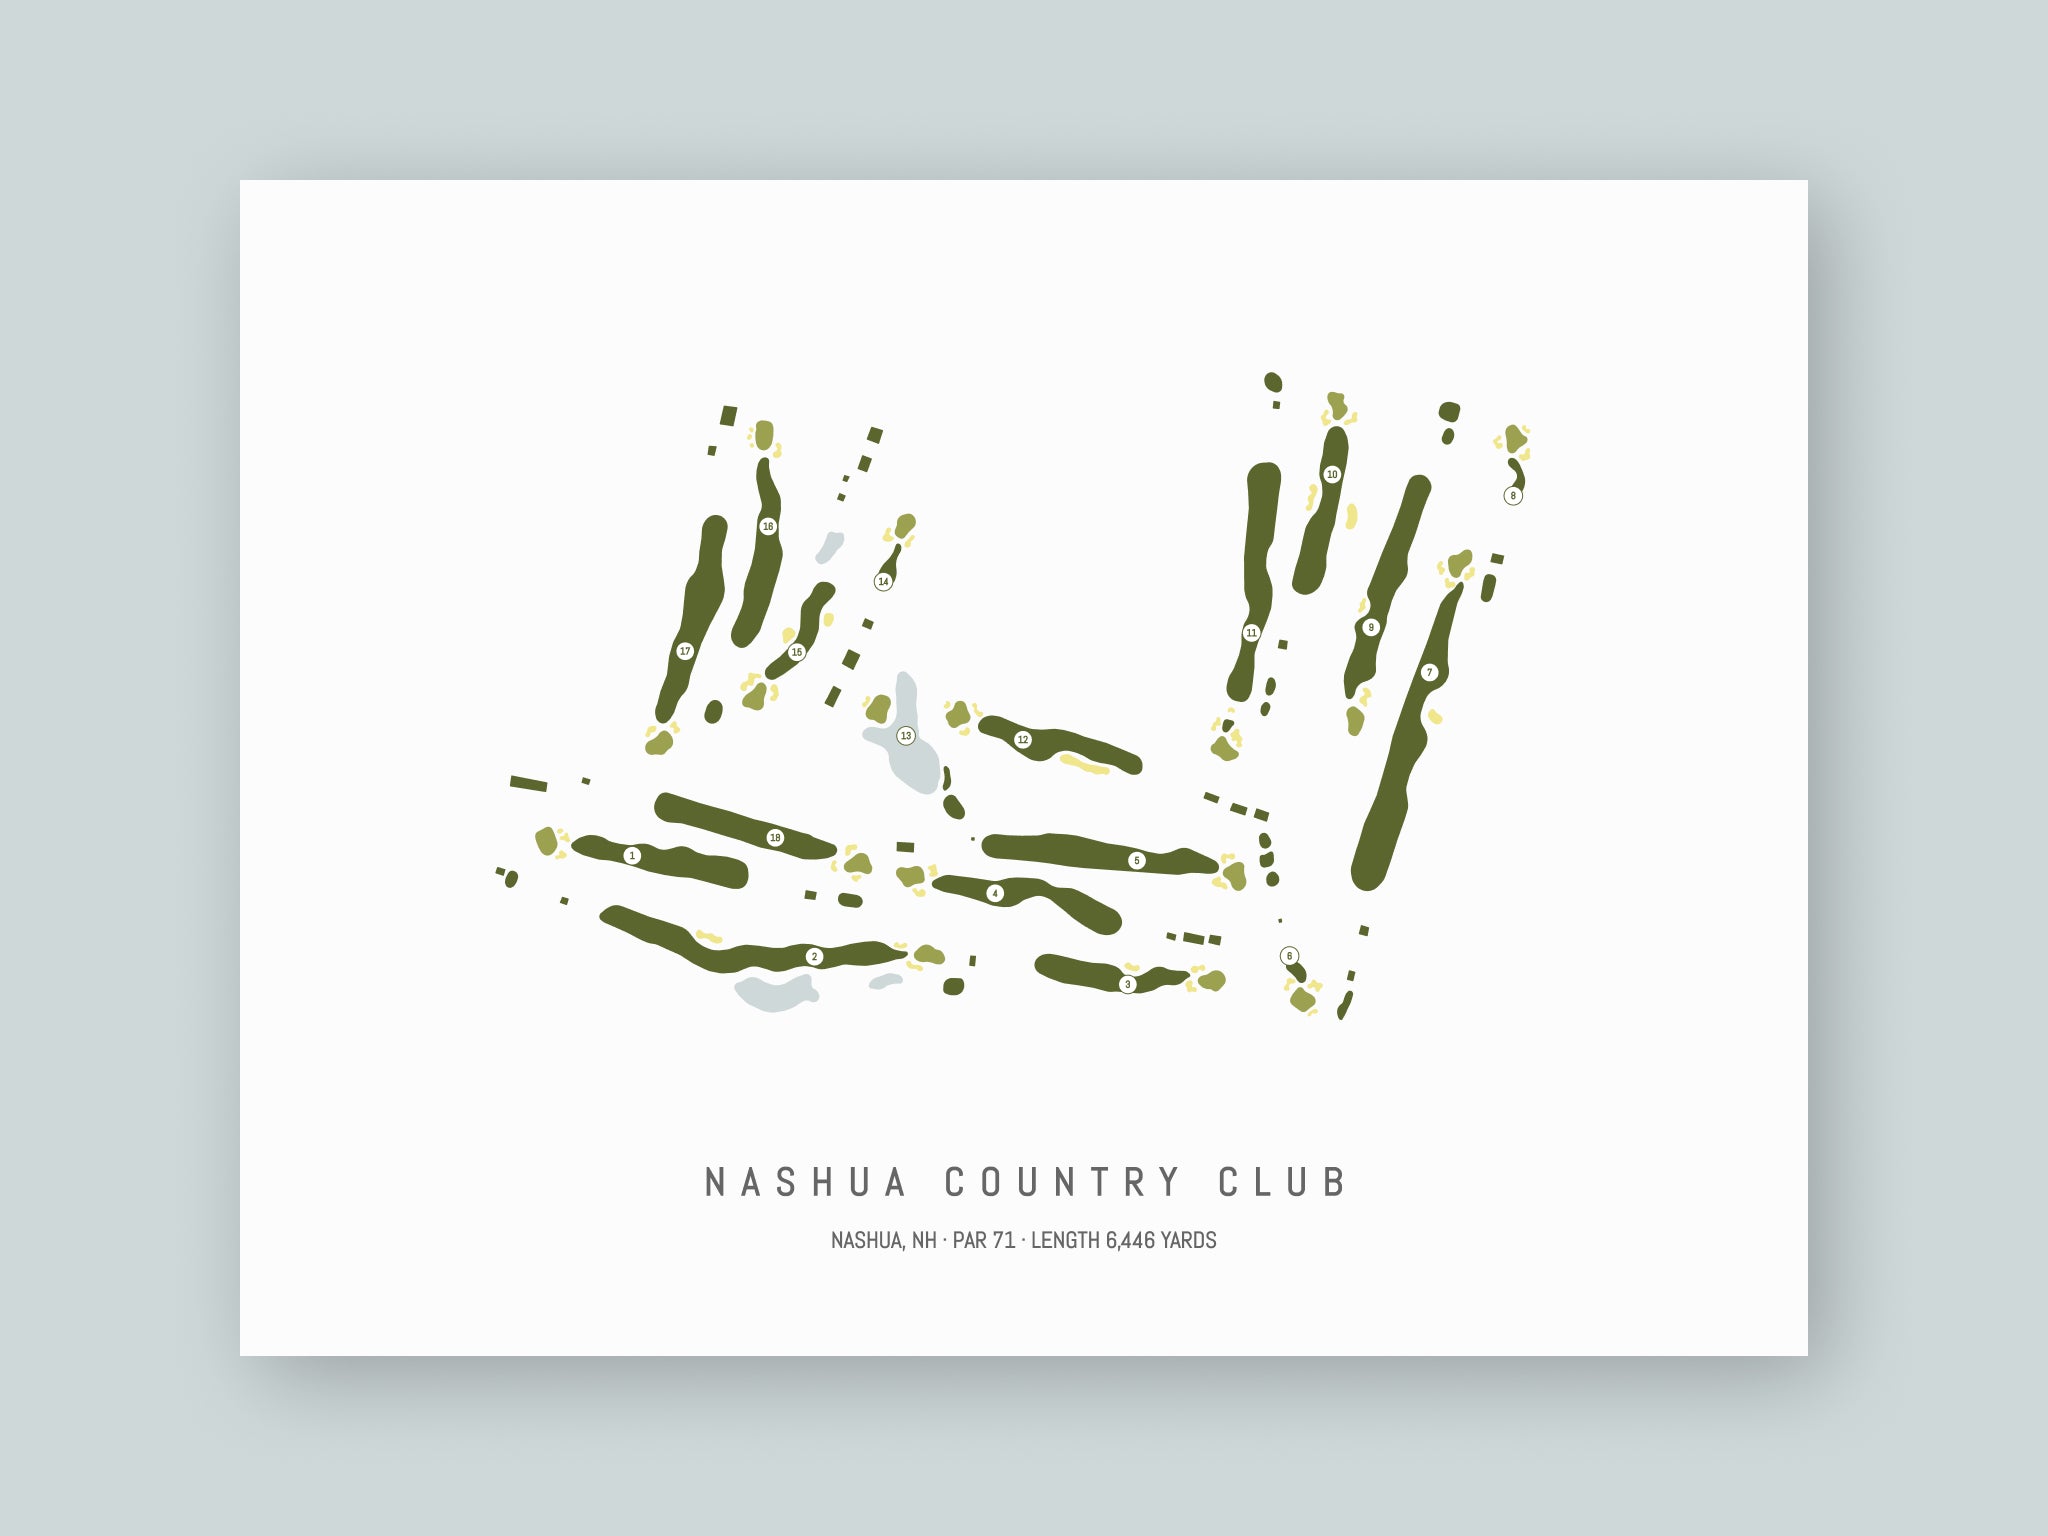 Nashua-Country-Club-NH--Unframed-24x18-With-Hole-Numbers